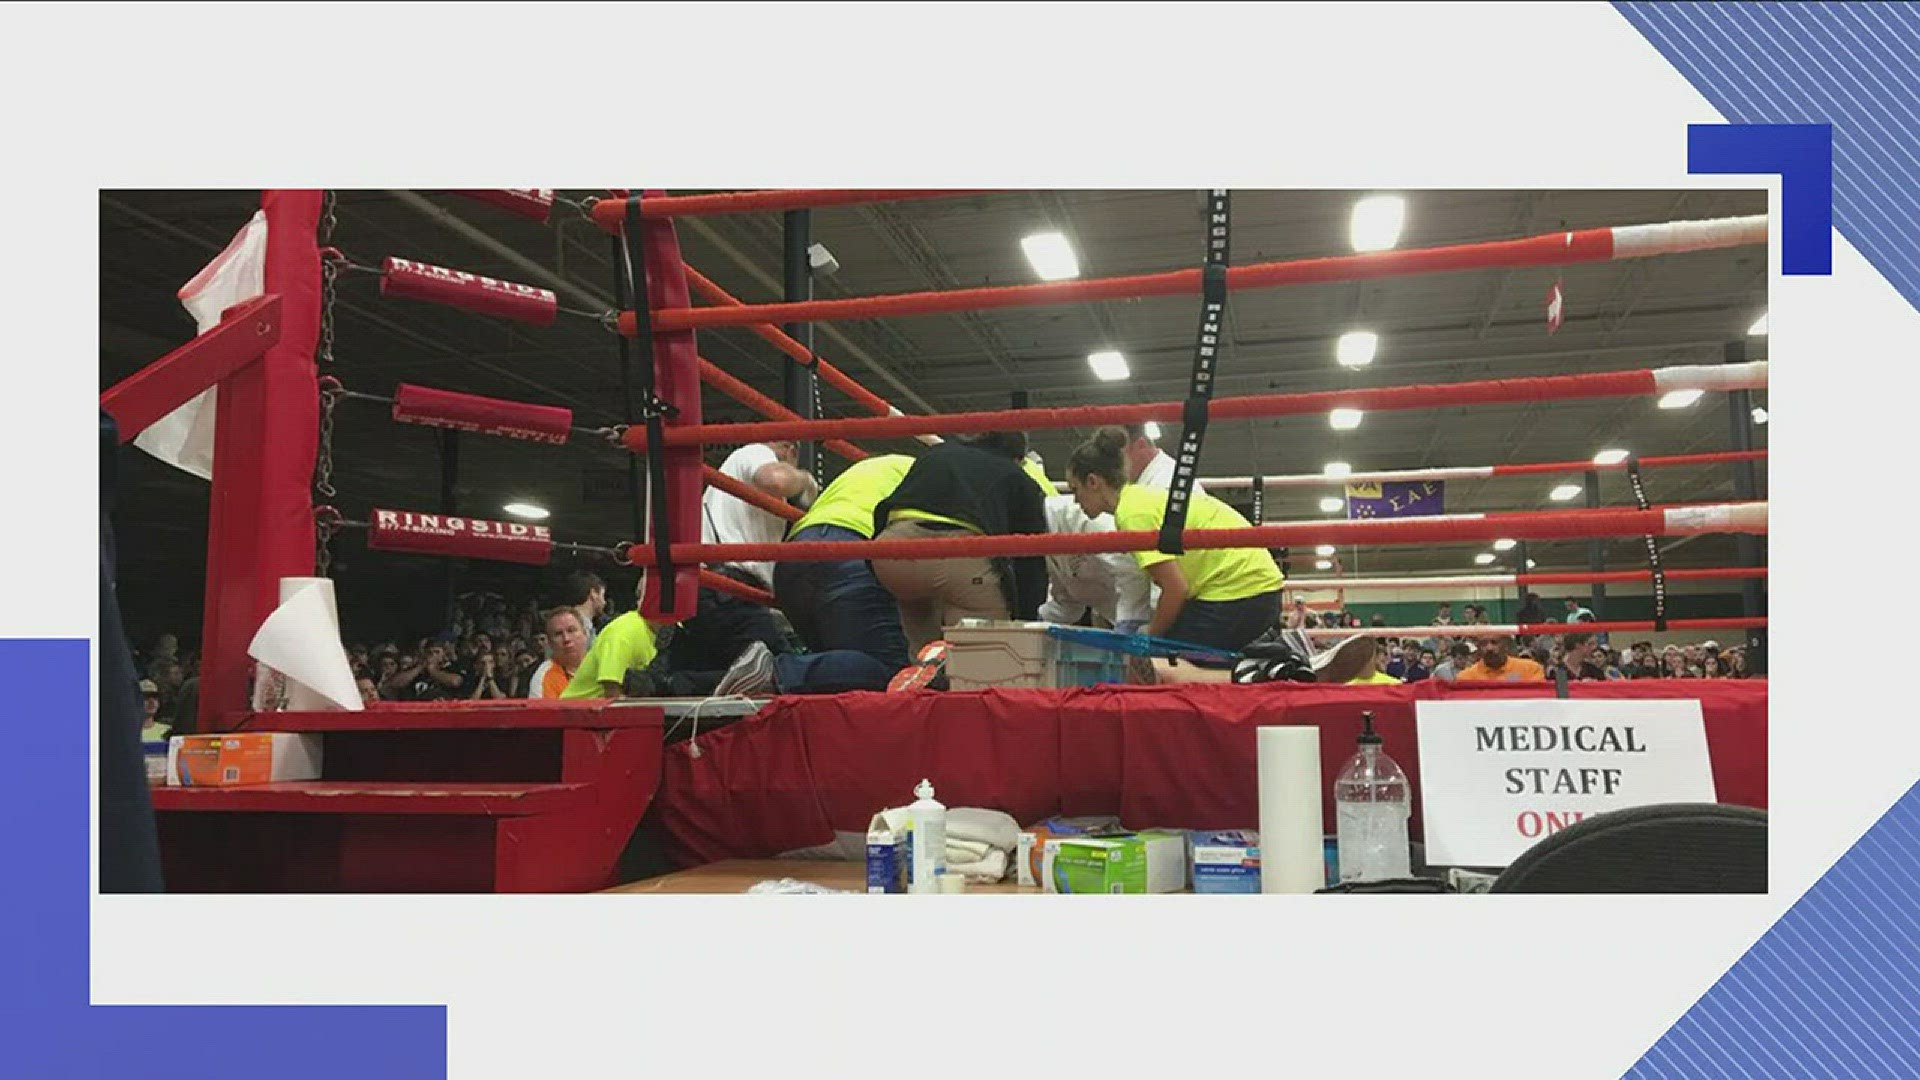 Feb. 23, 2018: A boxing tournament with UT fraternity members was called of early after a boxer collapsed between rounds and didn't get up.